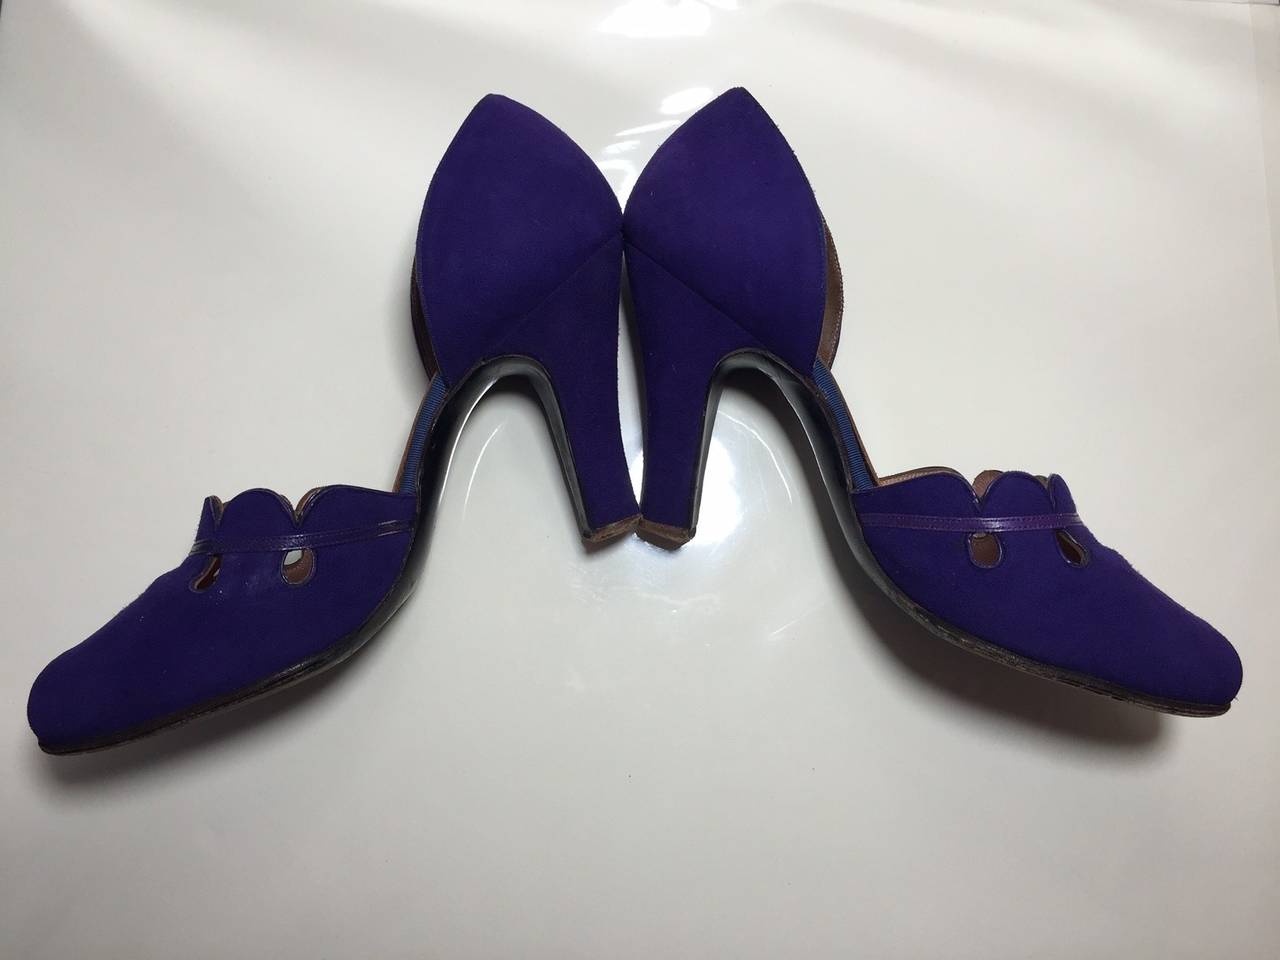 1940s Billy Ziton brand purple suede peep-toe d'Orsay pumps with fabulous vamp treatment.